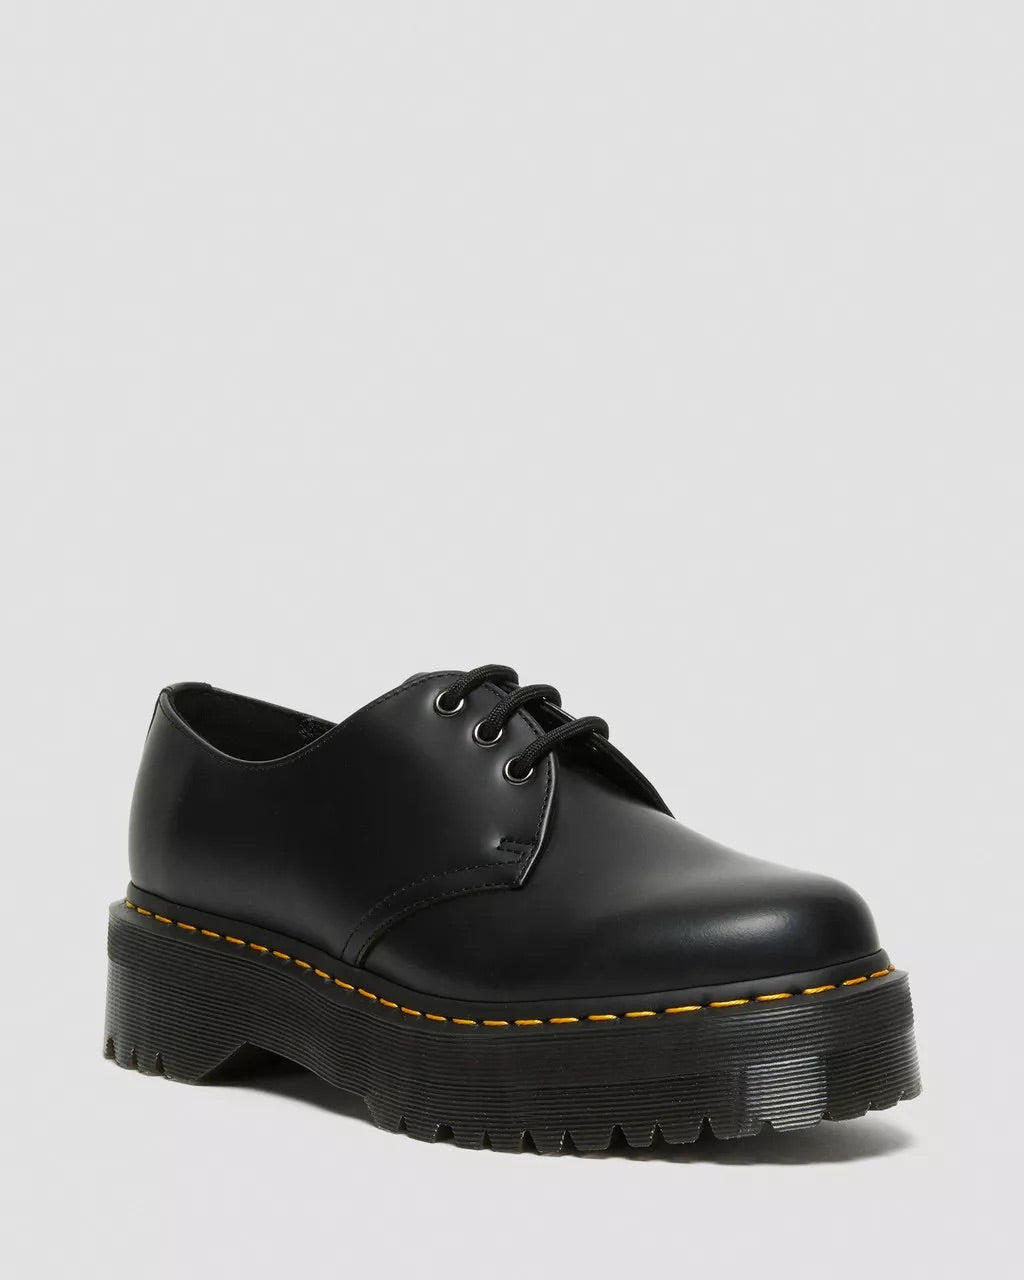 Dr MARTENS 1461 QUAD CLASSIC SHOE WITH YELLOW STITCHING